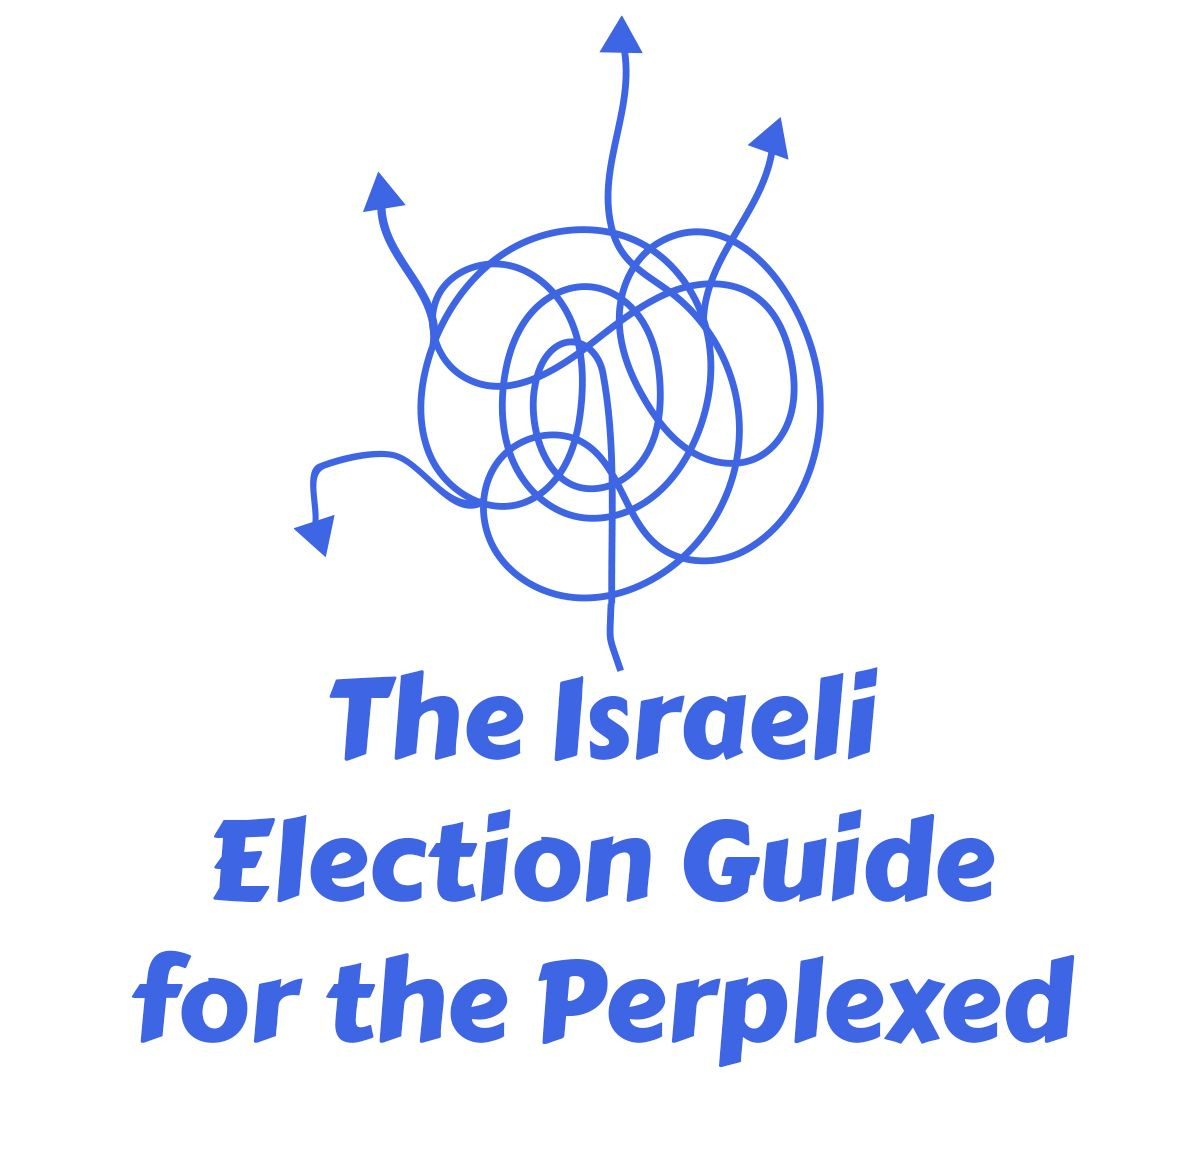 The Israeli Election Guide for the Perplexed, Part 1